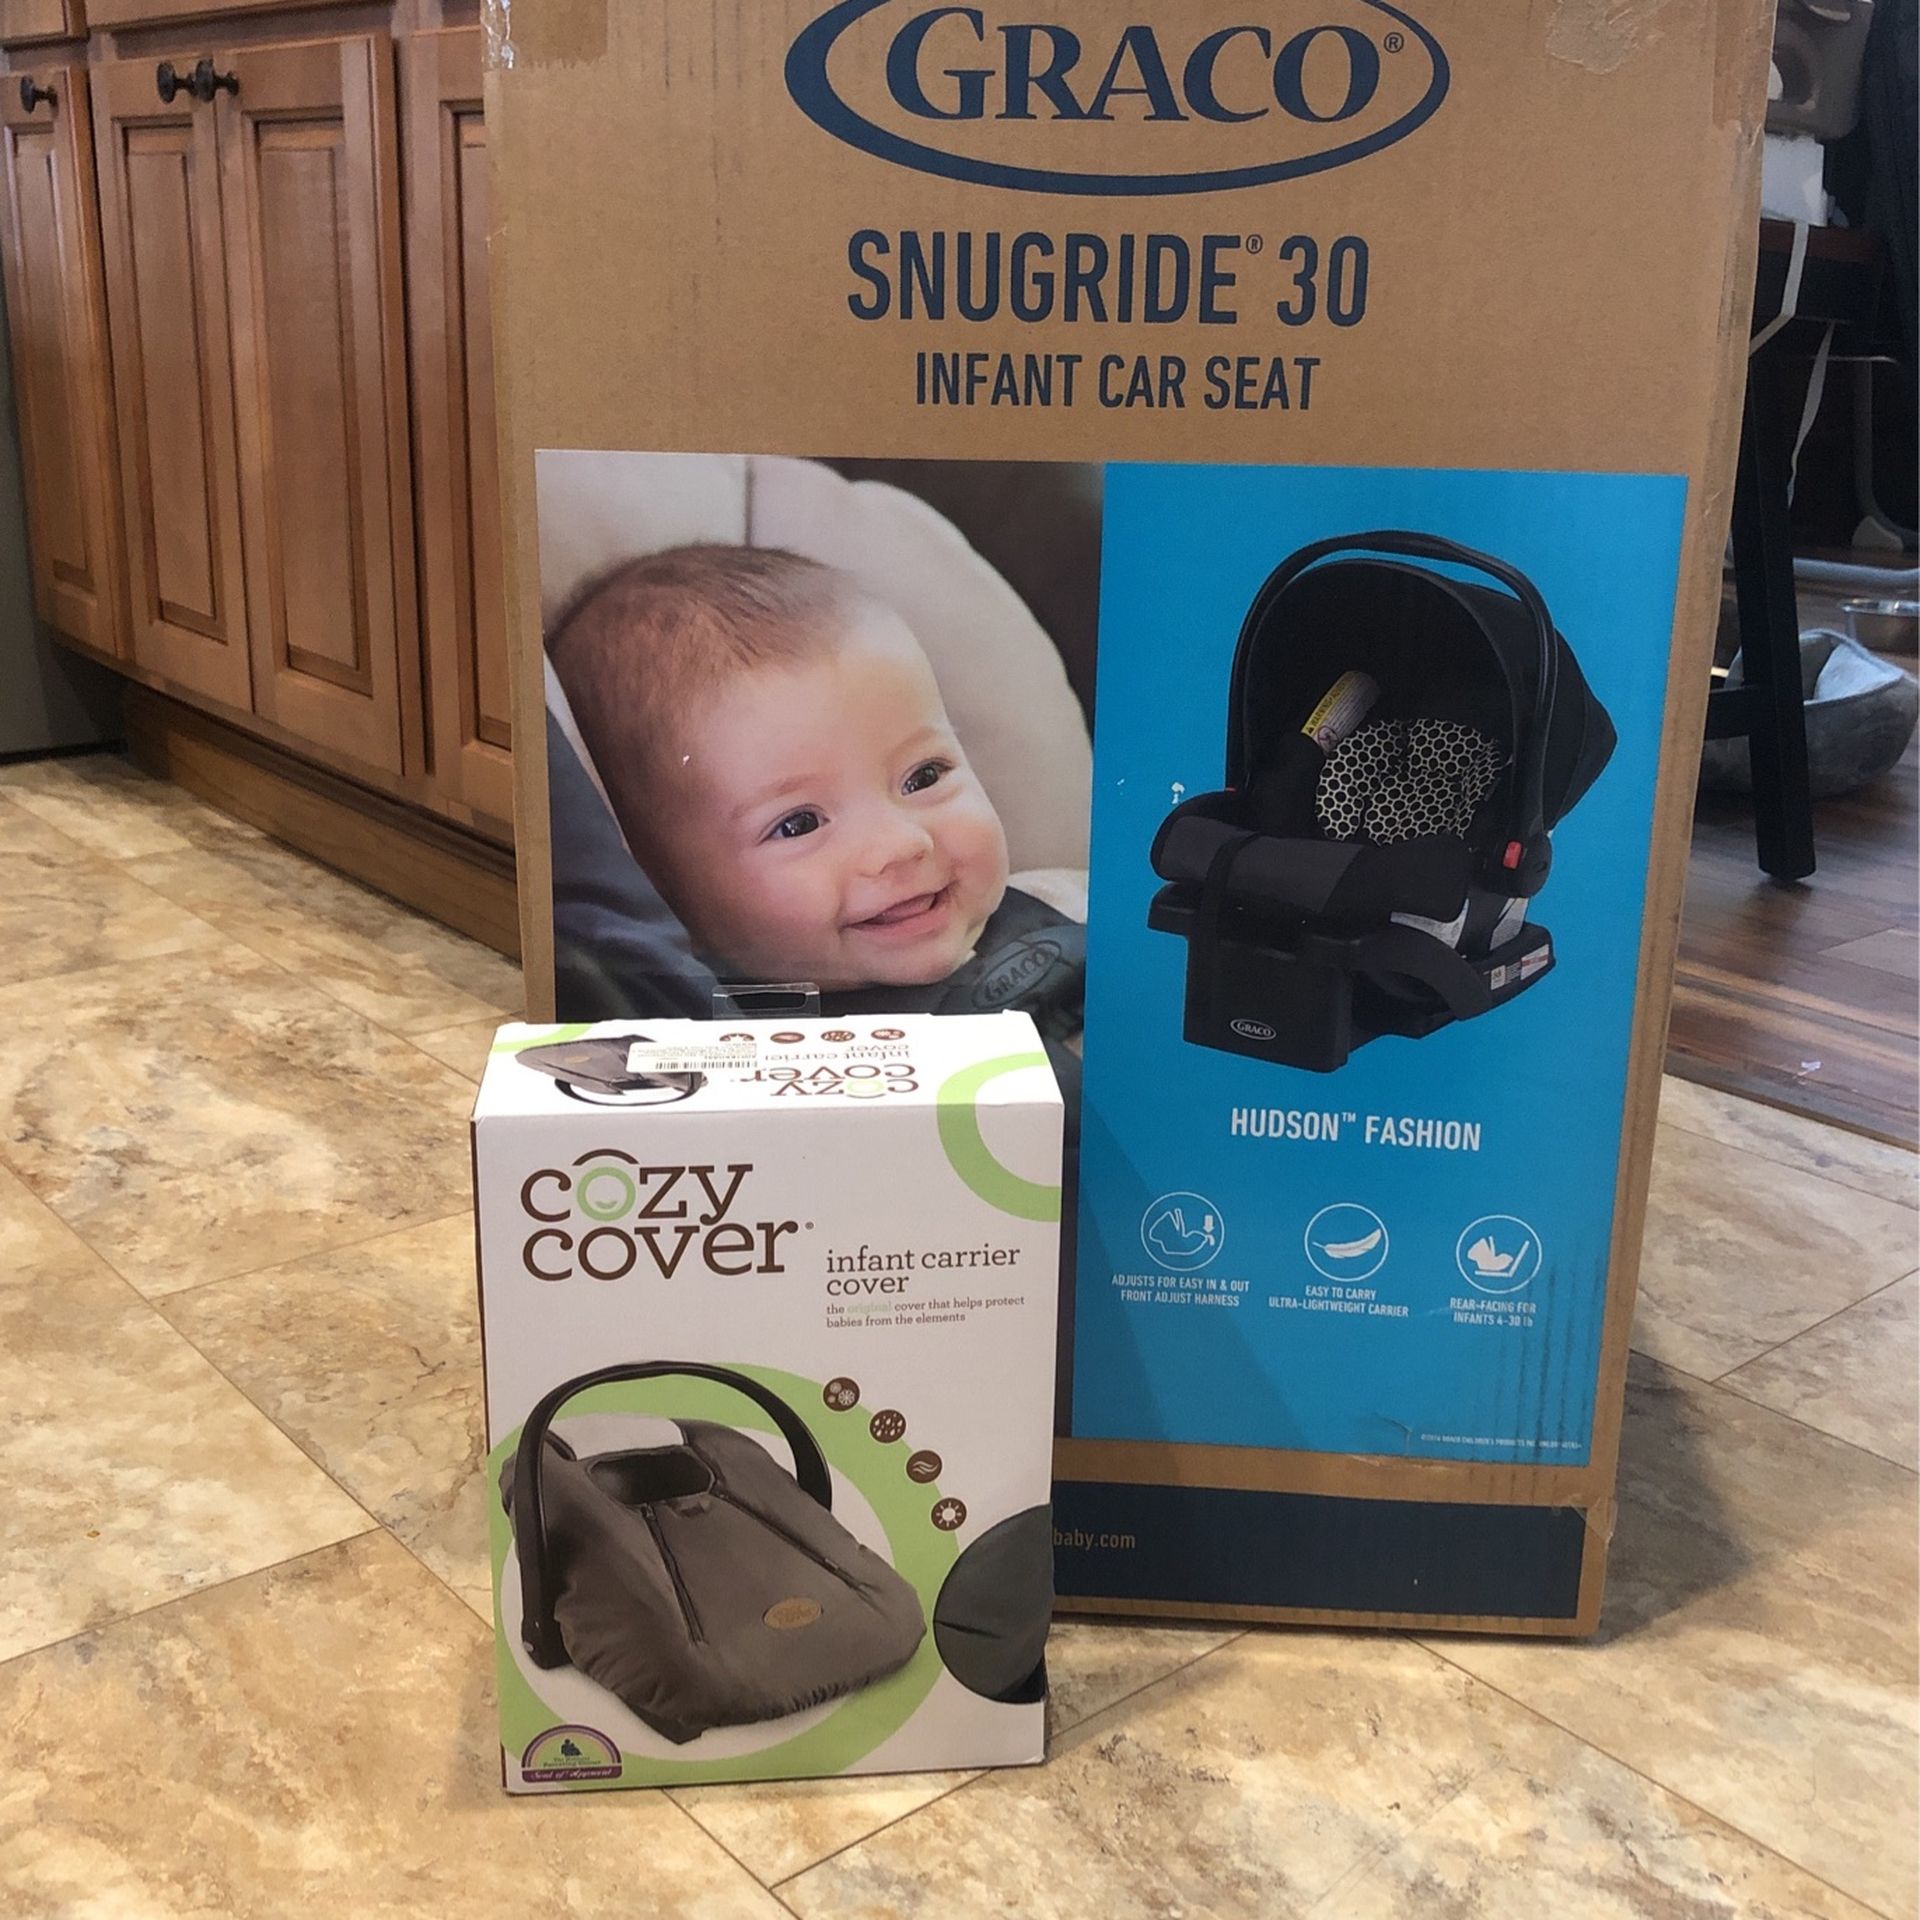 Graco Snugride 30 Infant Car Seat and Cozy Cover